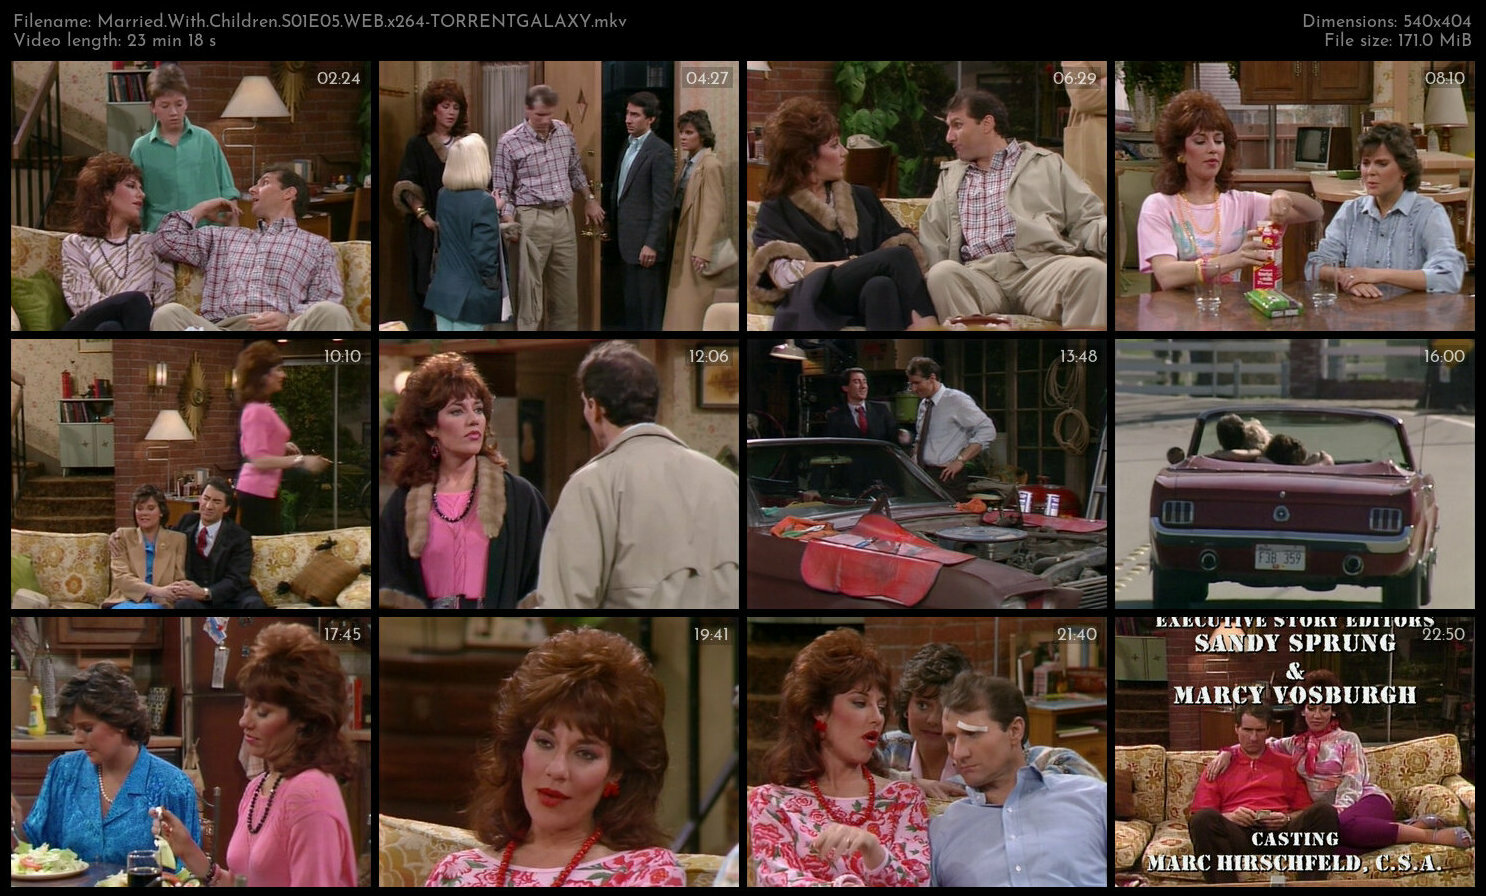 Married With Children S01E05 WEB x264 TORRENTGALAXY